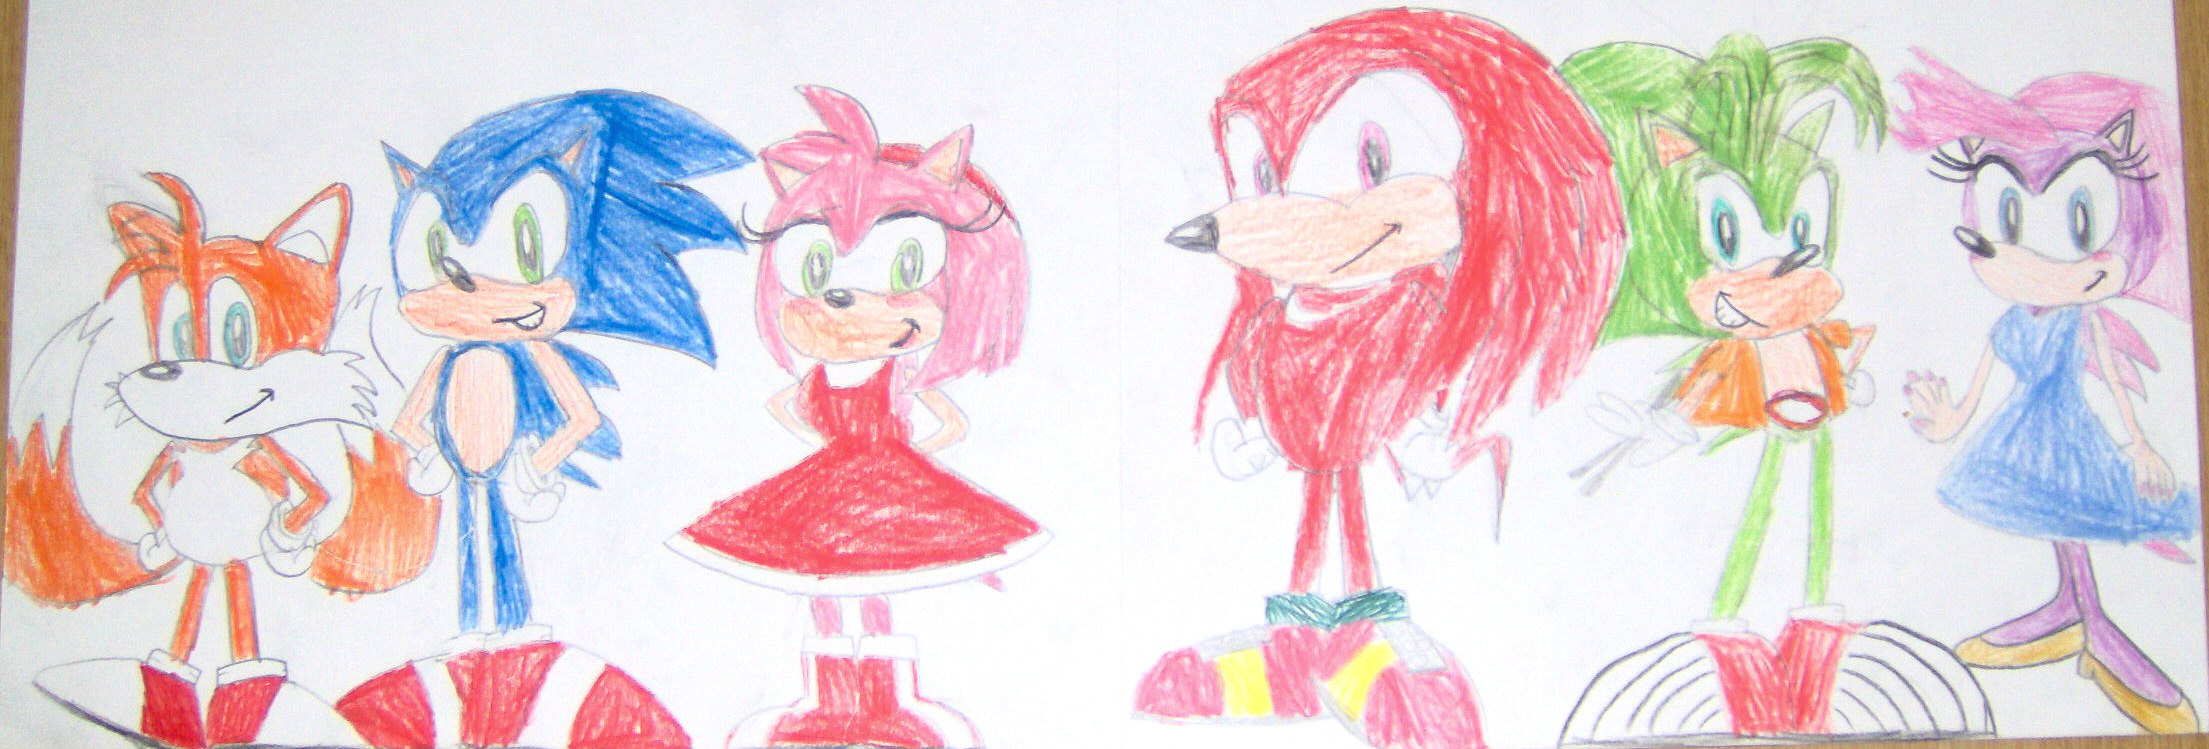 Tails, Sonic, Amy, Knuckles, Manic, &amp; Sonia by germanname